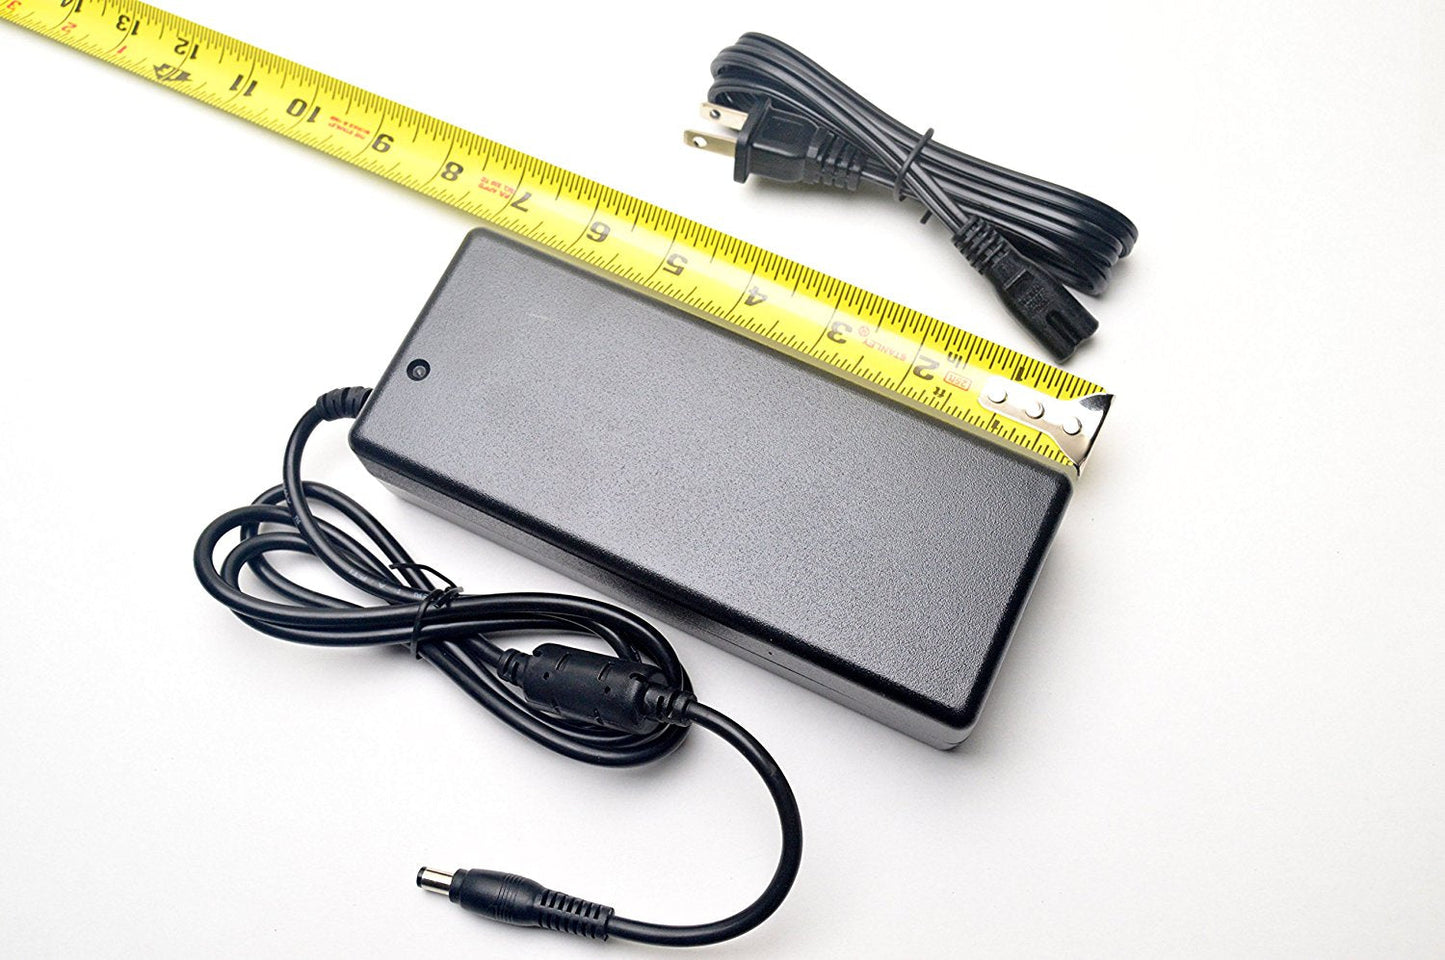 realUV™ DC Power Supply for LED Strip